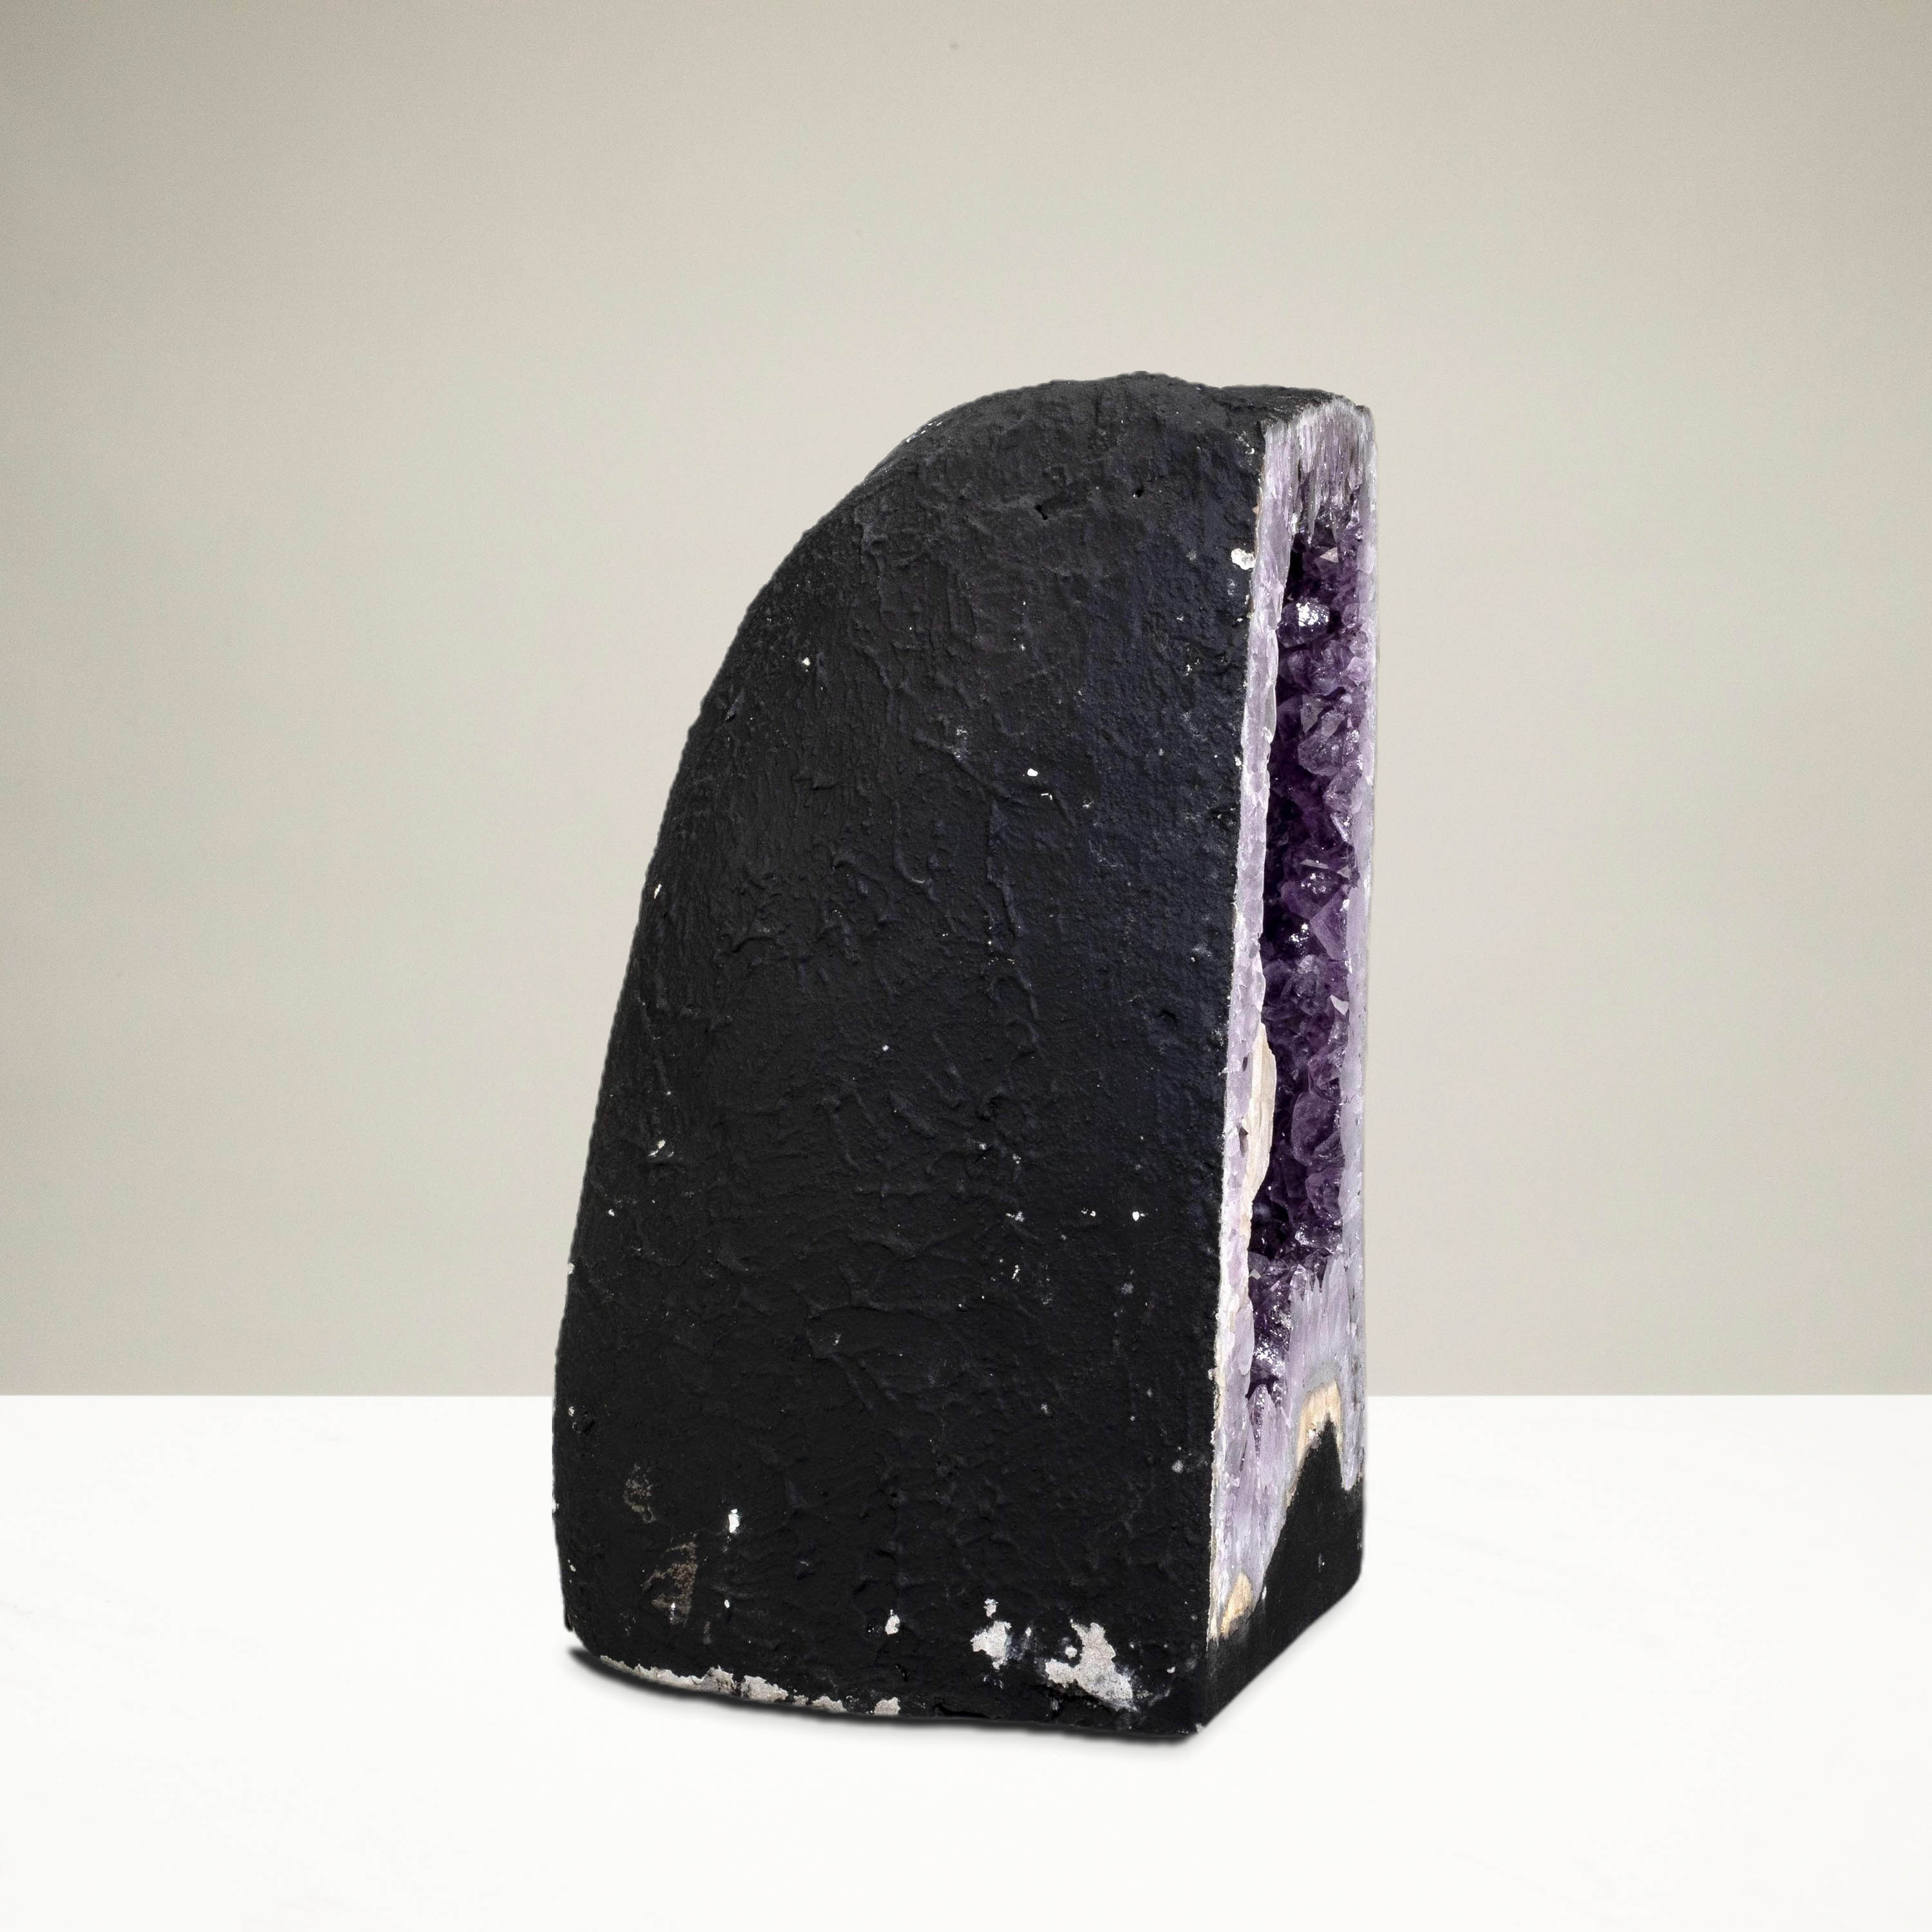 Kalifano Amethyst Natural Brazilian Amethyst Crystal Geode Cathedral - 15 in / 62 lbs BAG6600.002